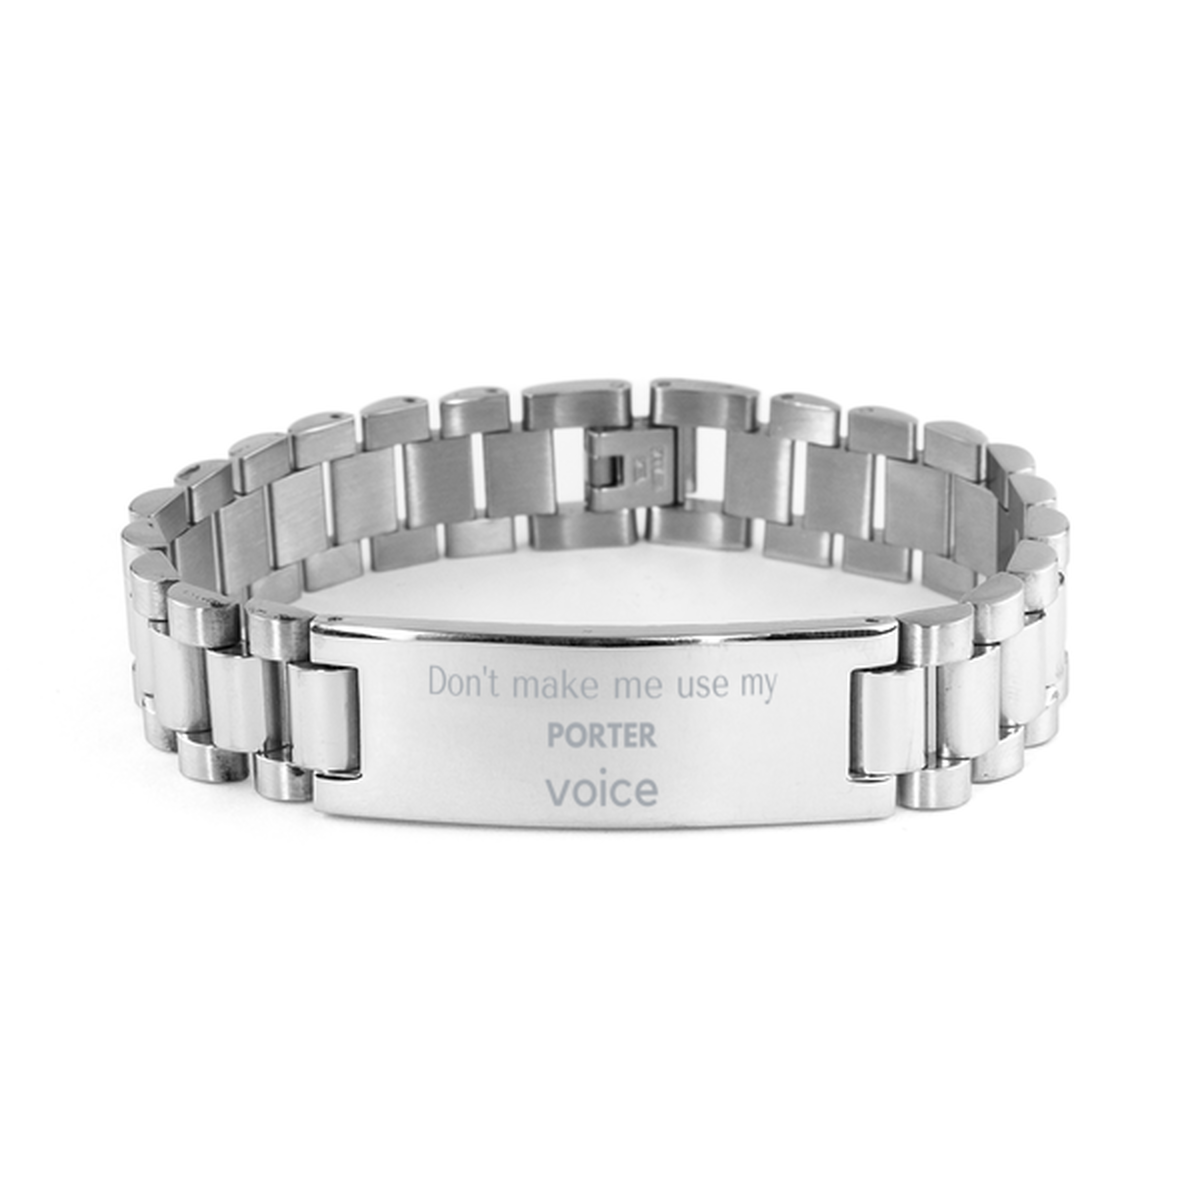 Don't make me use my Porter voice, Sarcasm Porter Gifts, Christmas Porter Ladder Stainless Steel Bracelet Birthday Unique Gifts For Porter Coworkers, Men, Women, Colleague, Friends